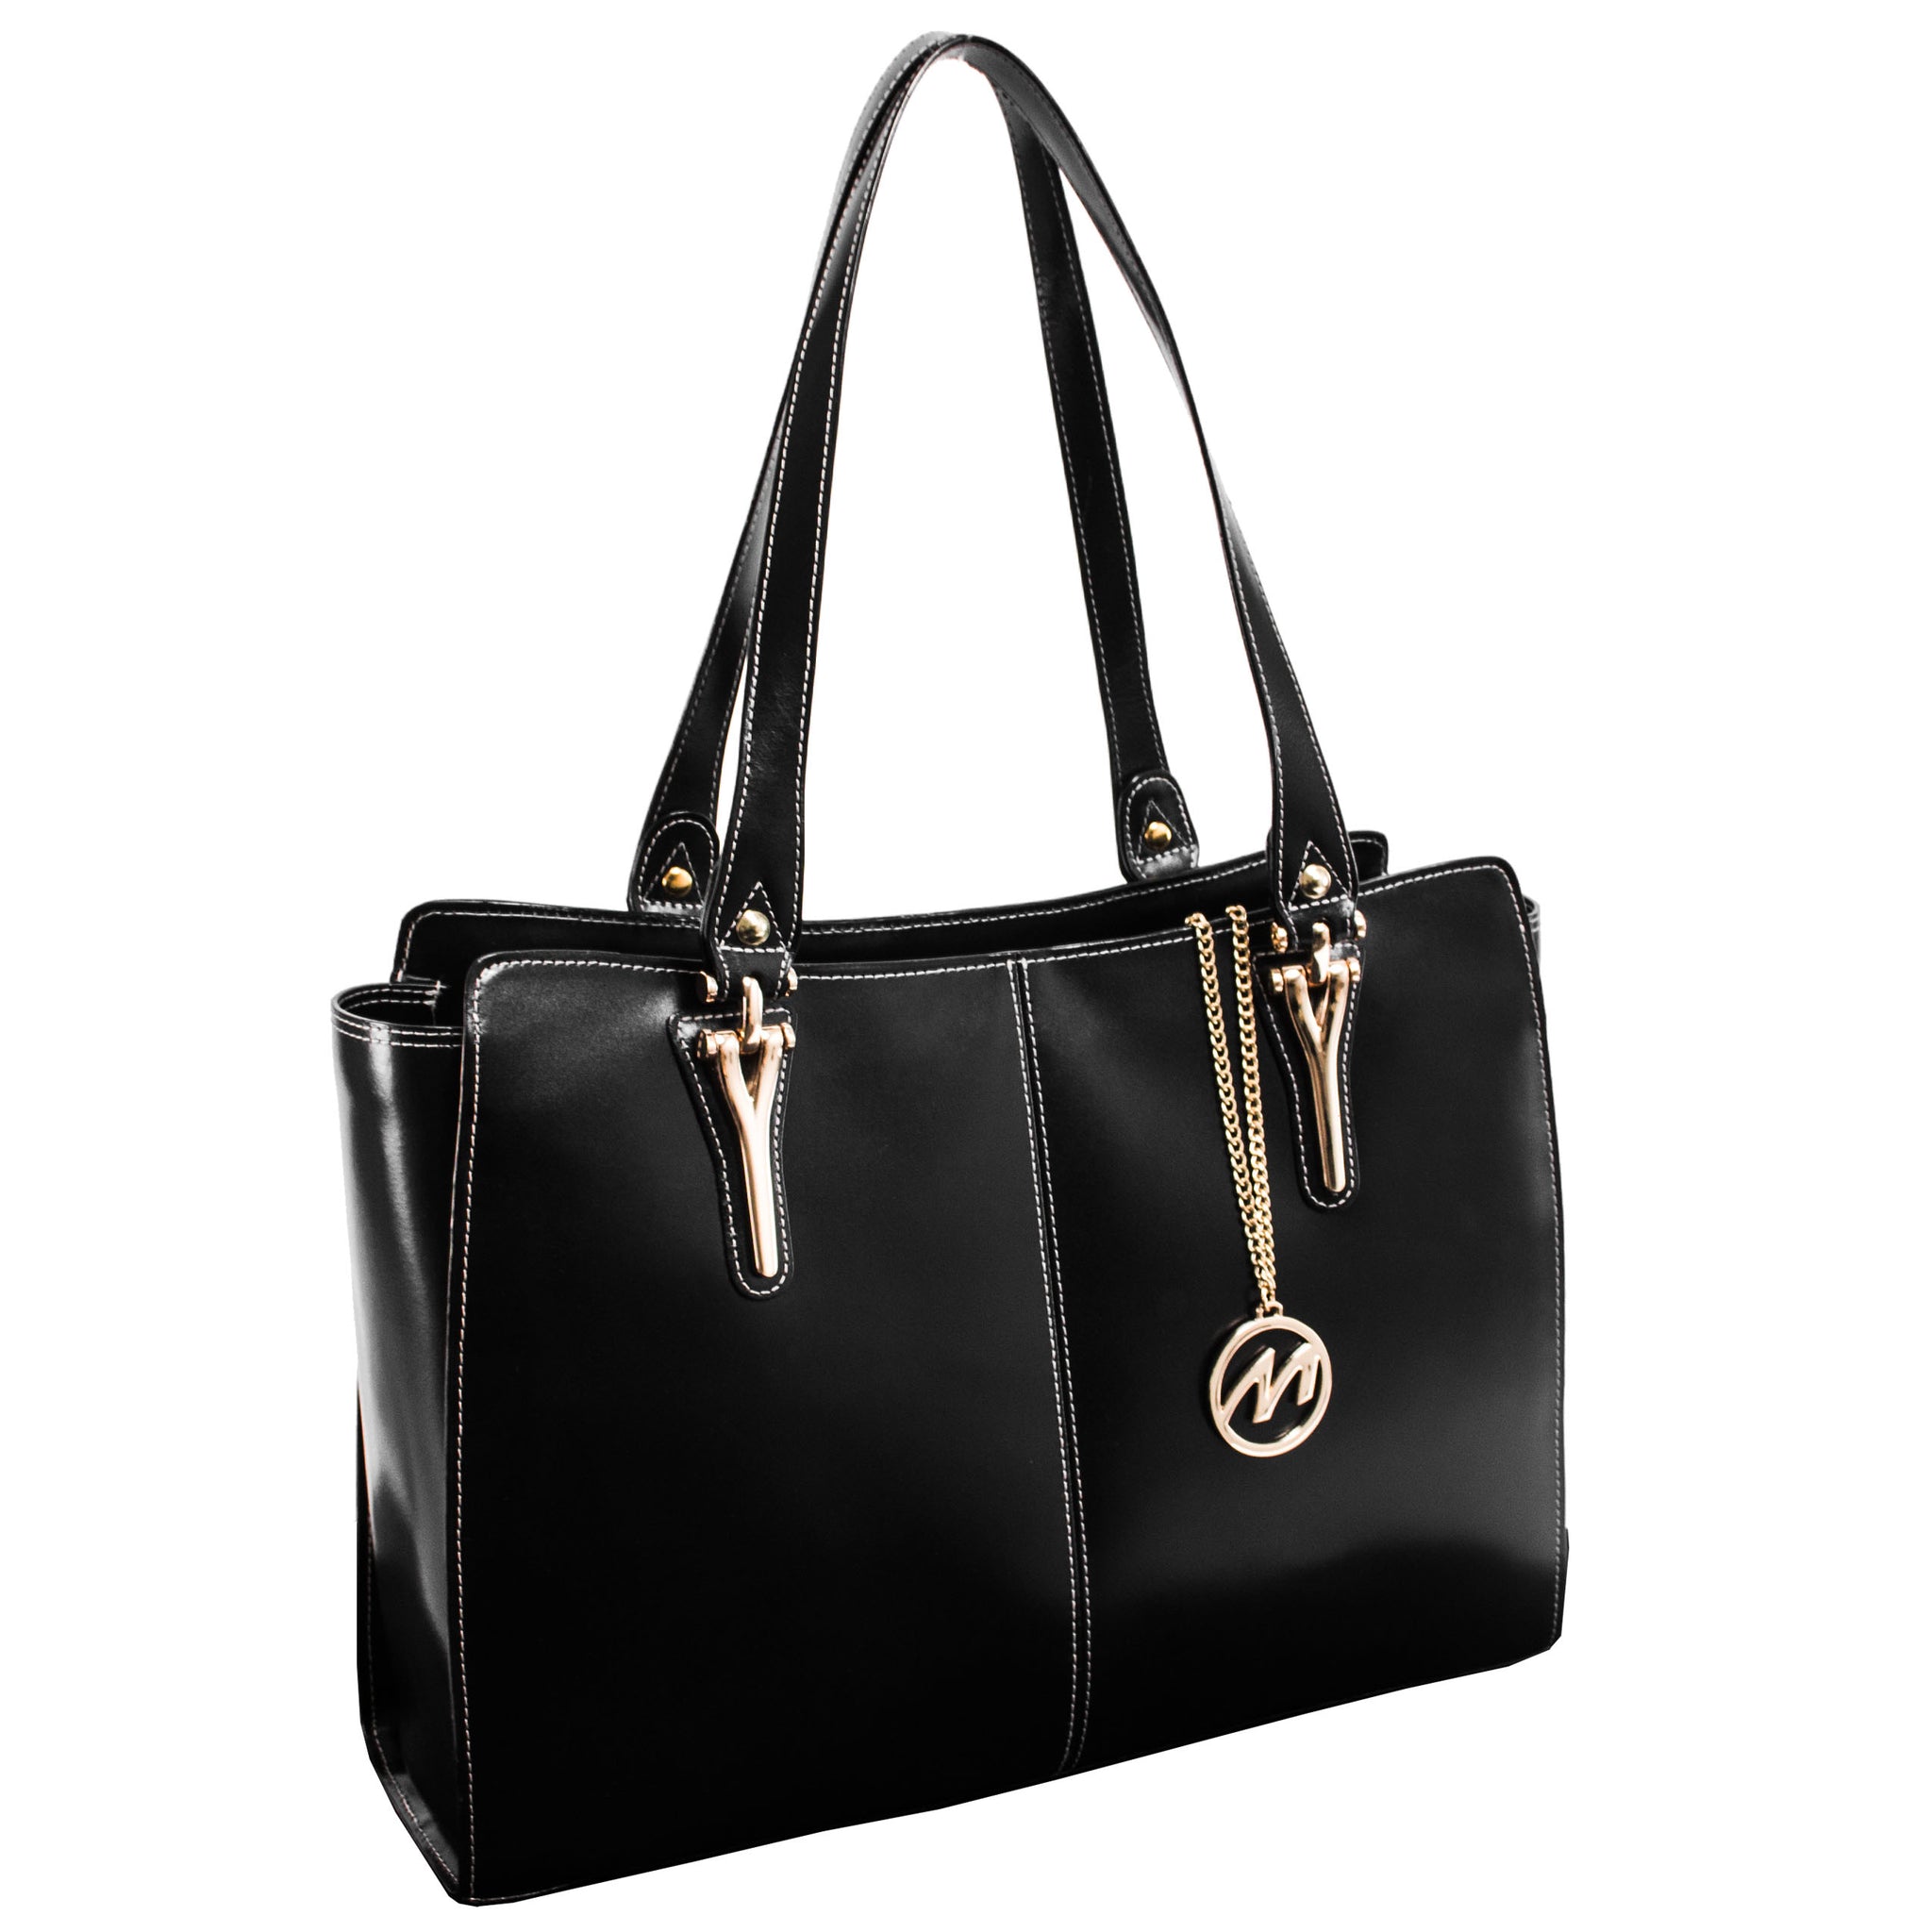 McKlein GLENNA Leather Ladies' Tote with Tablet Pocket